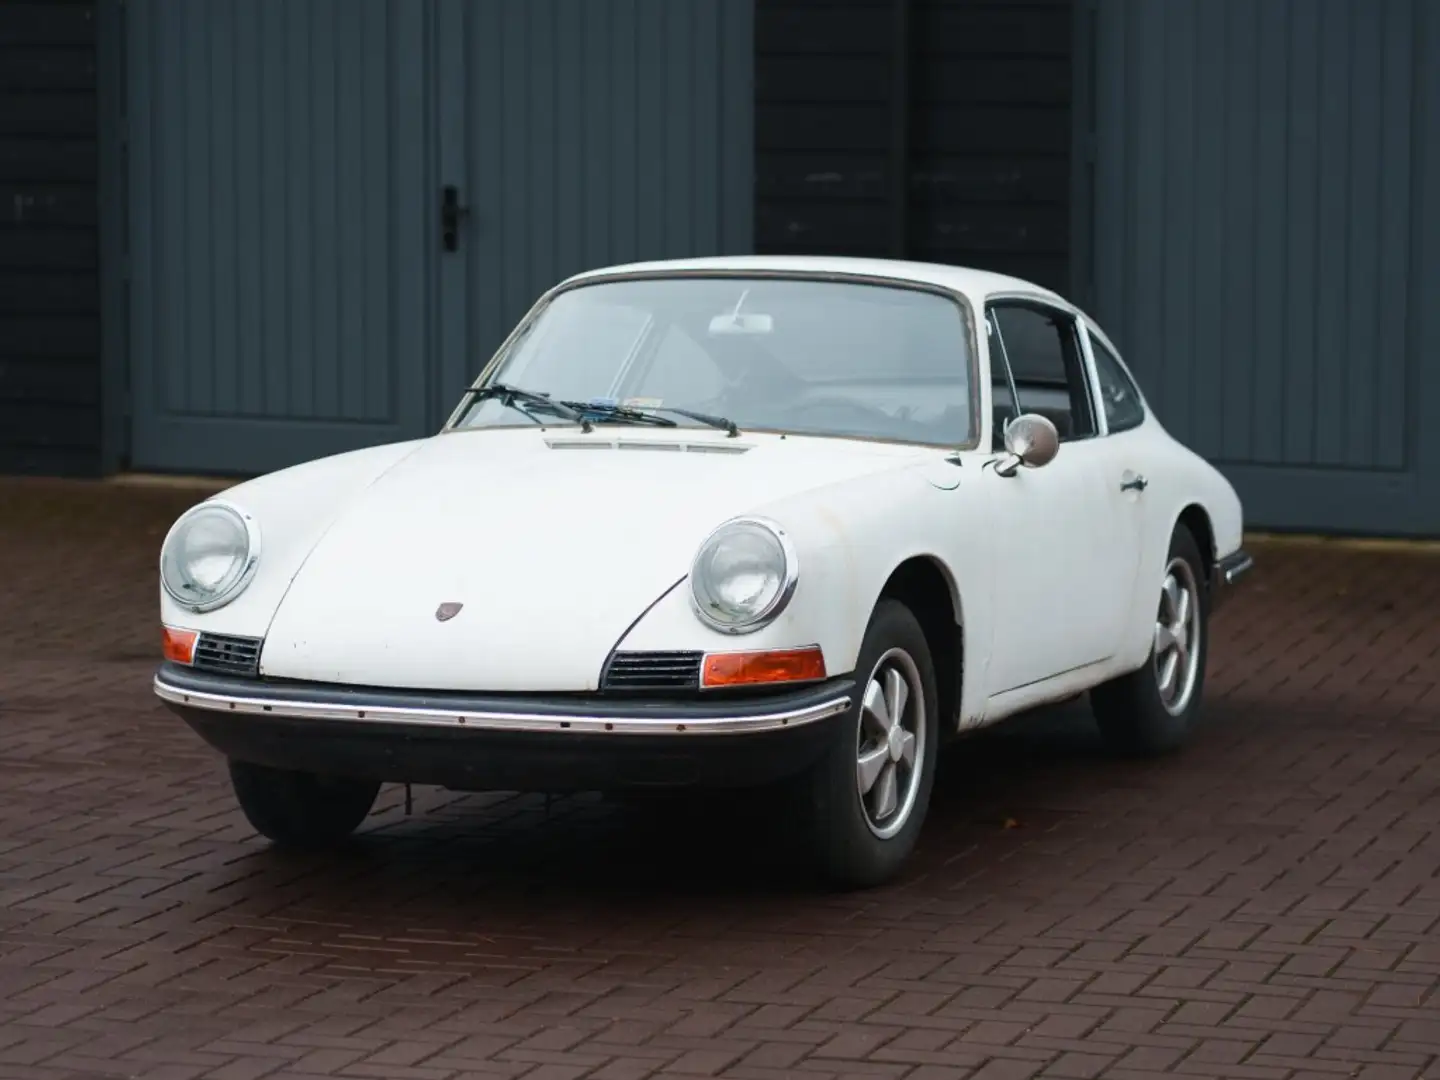 Porsche 912 Coupe late 1965 early 66 model Bianco - 1